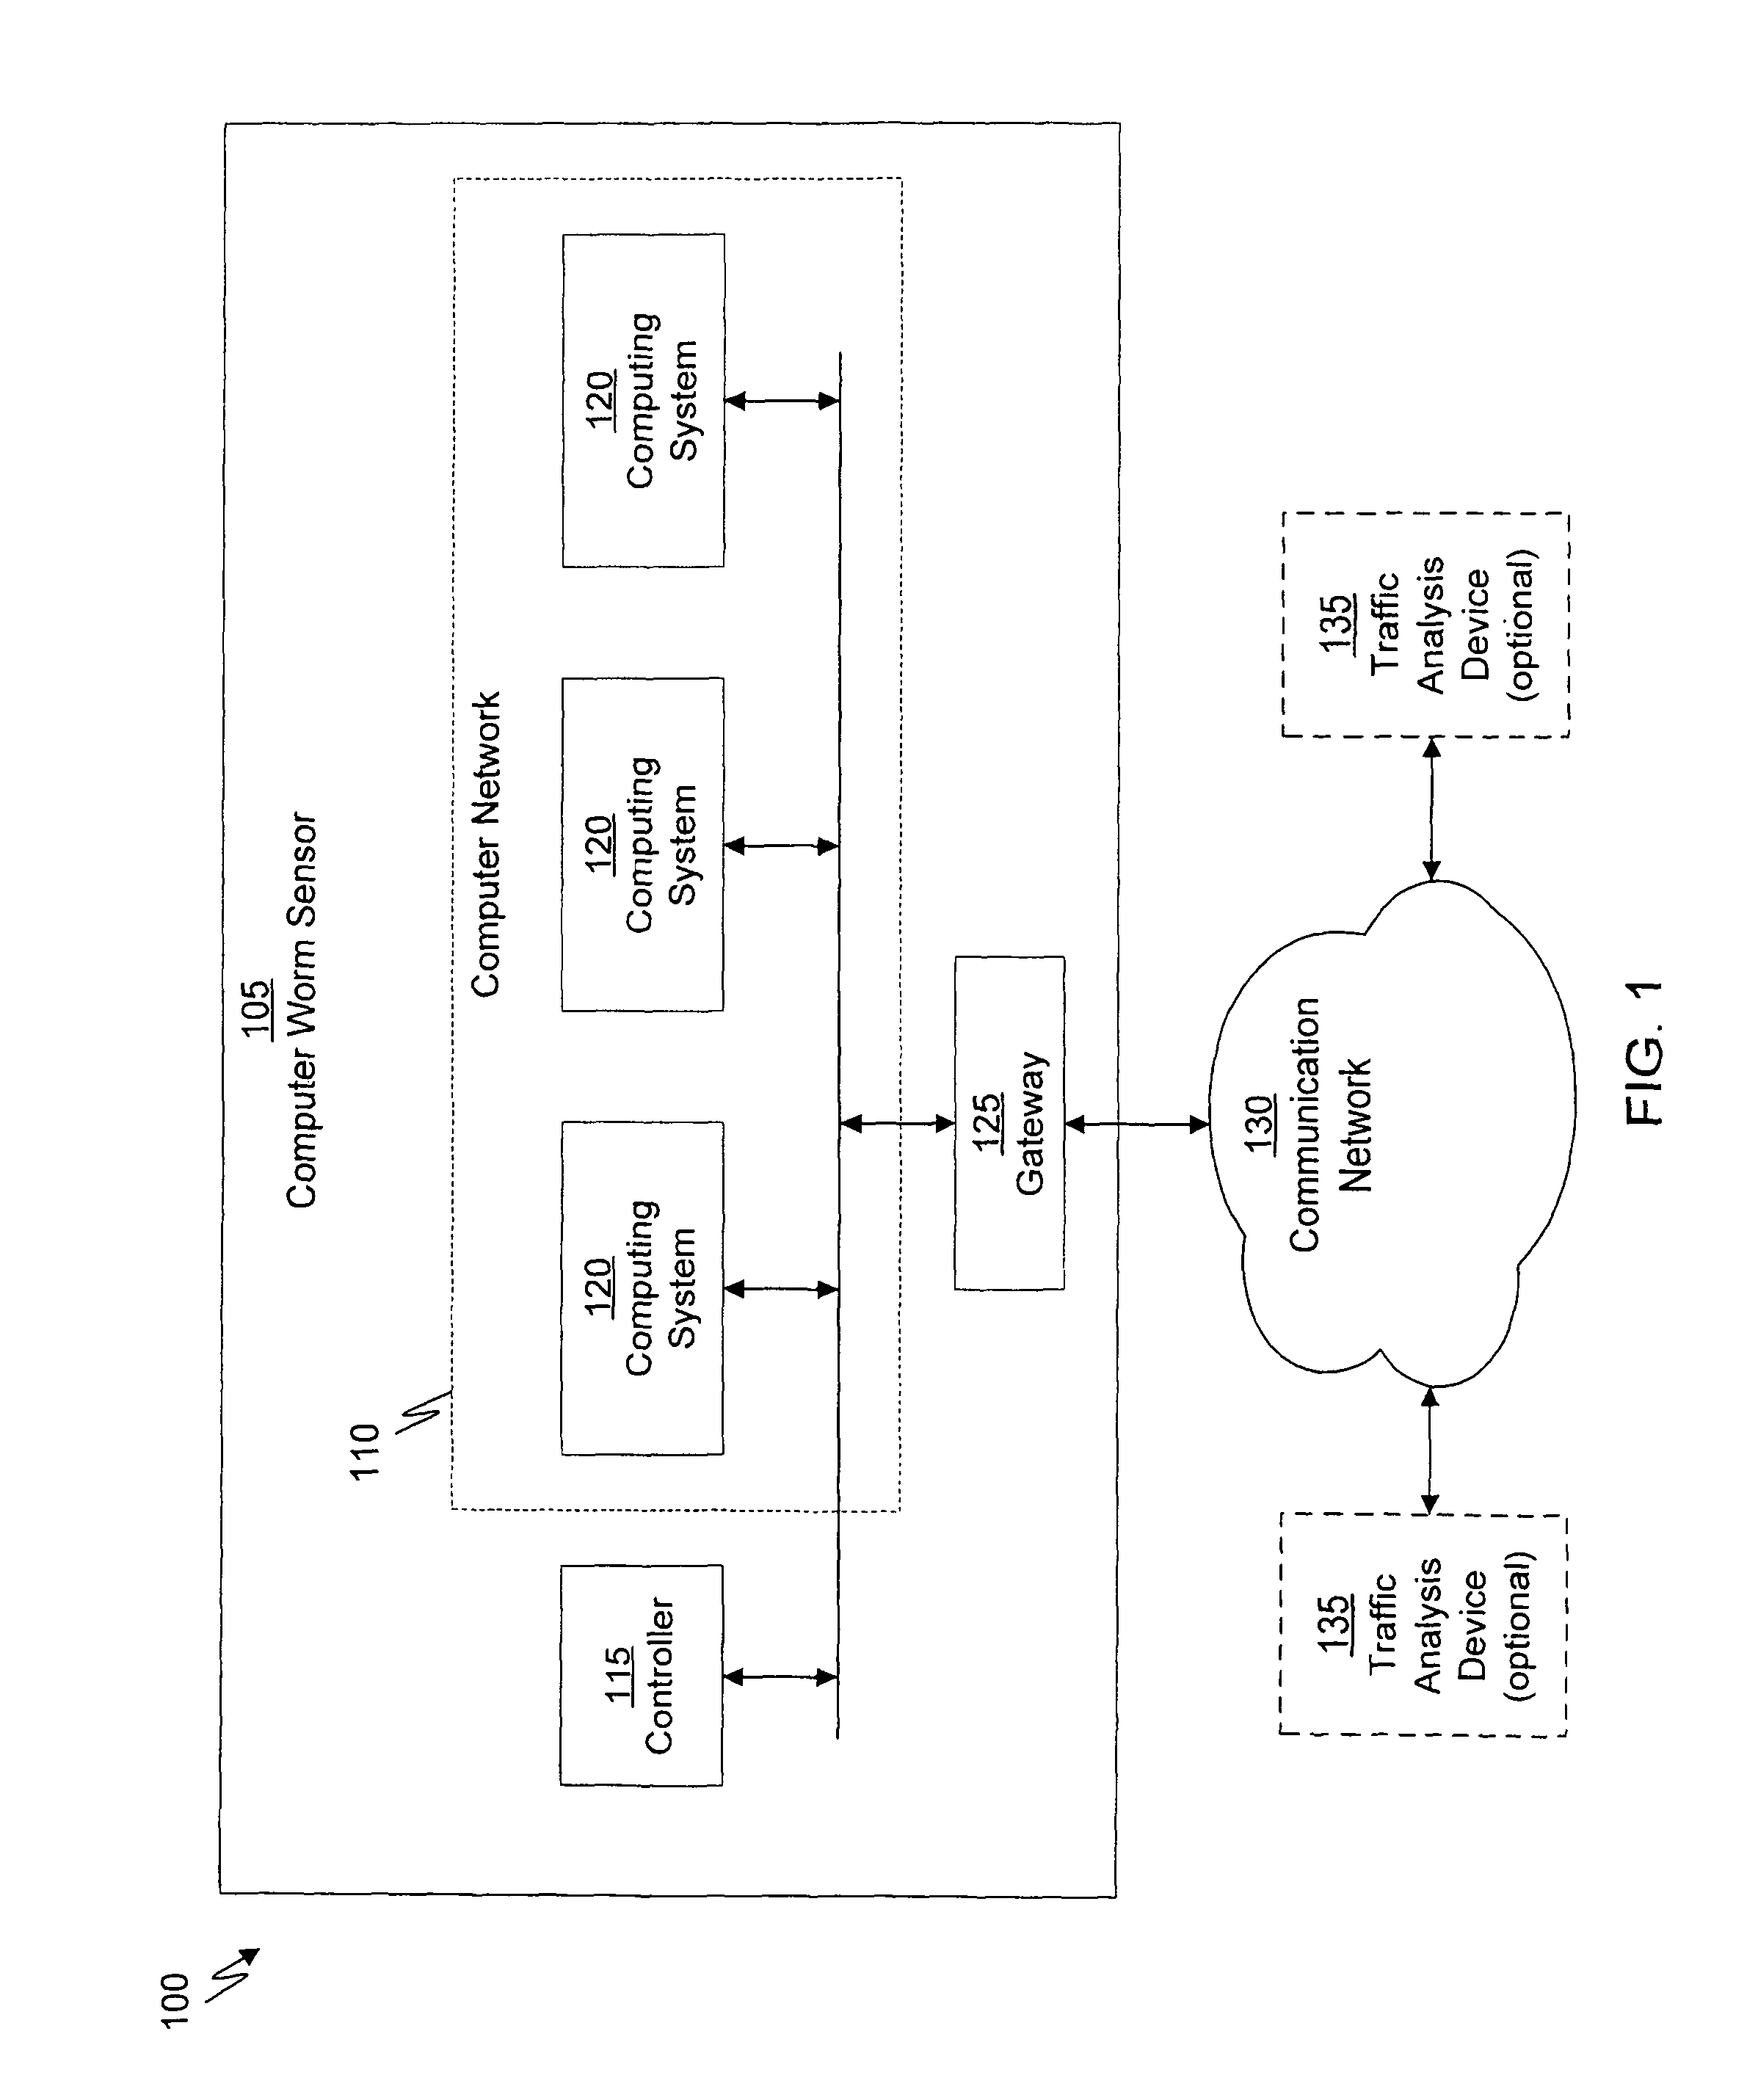 System and method of containing computer worms